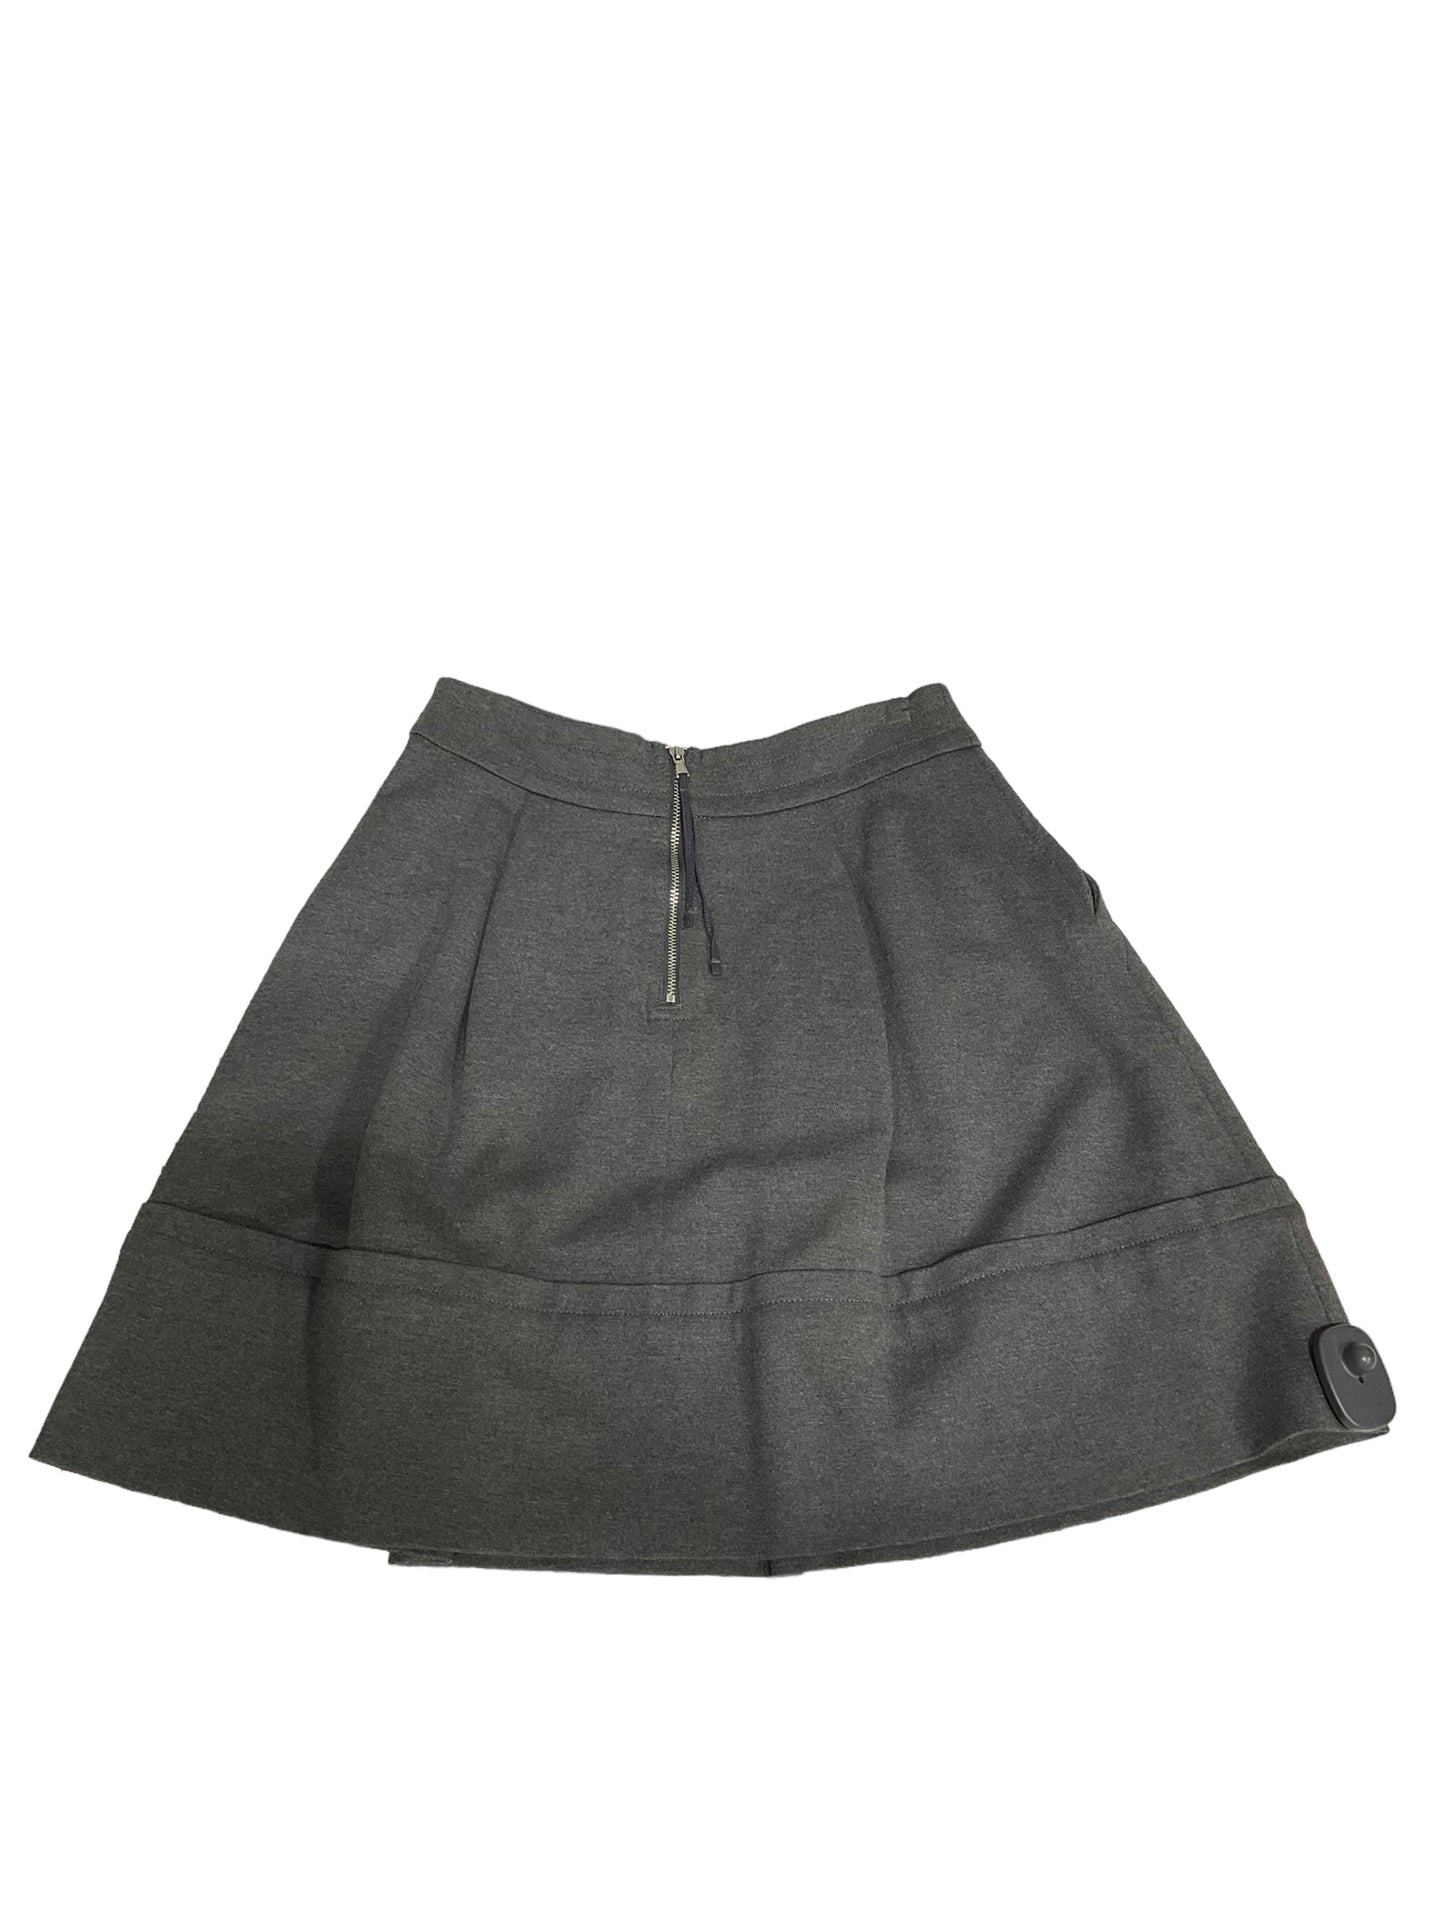 Skirt Designer By Marc By Marc Jacobs  Size: S